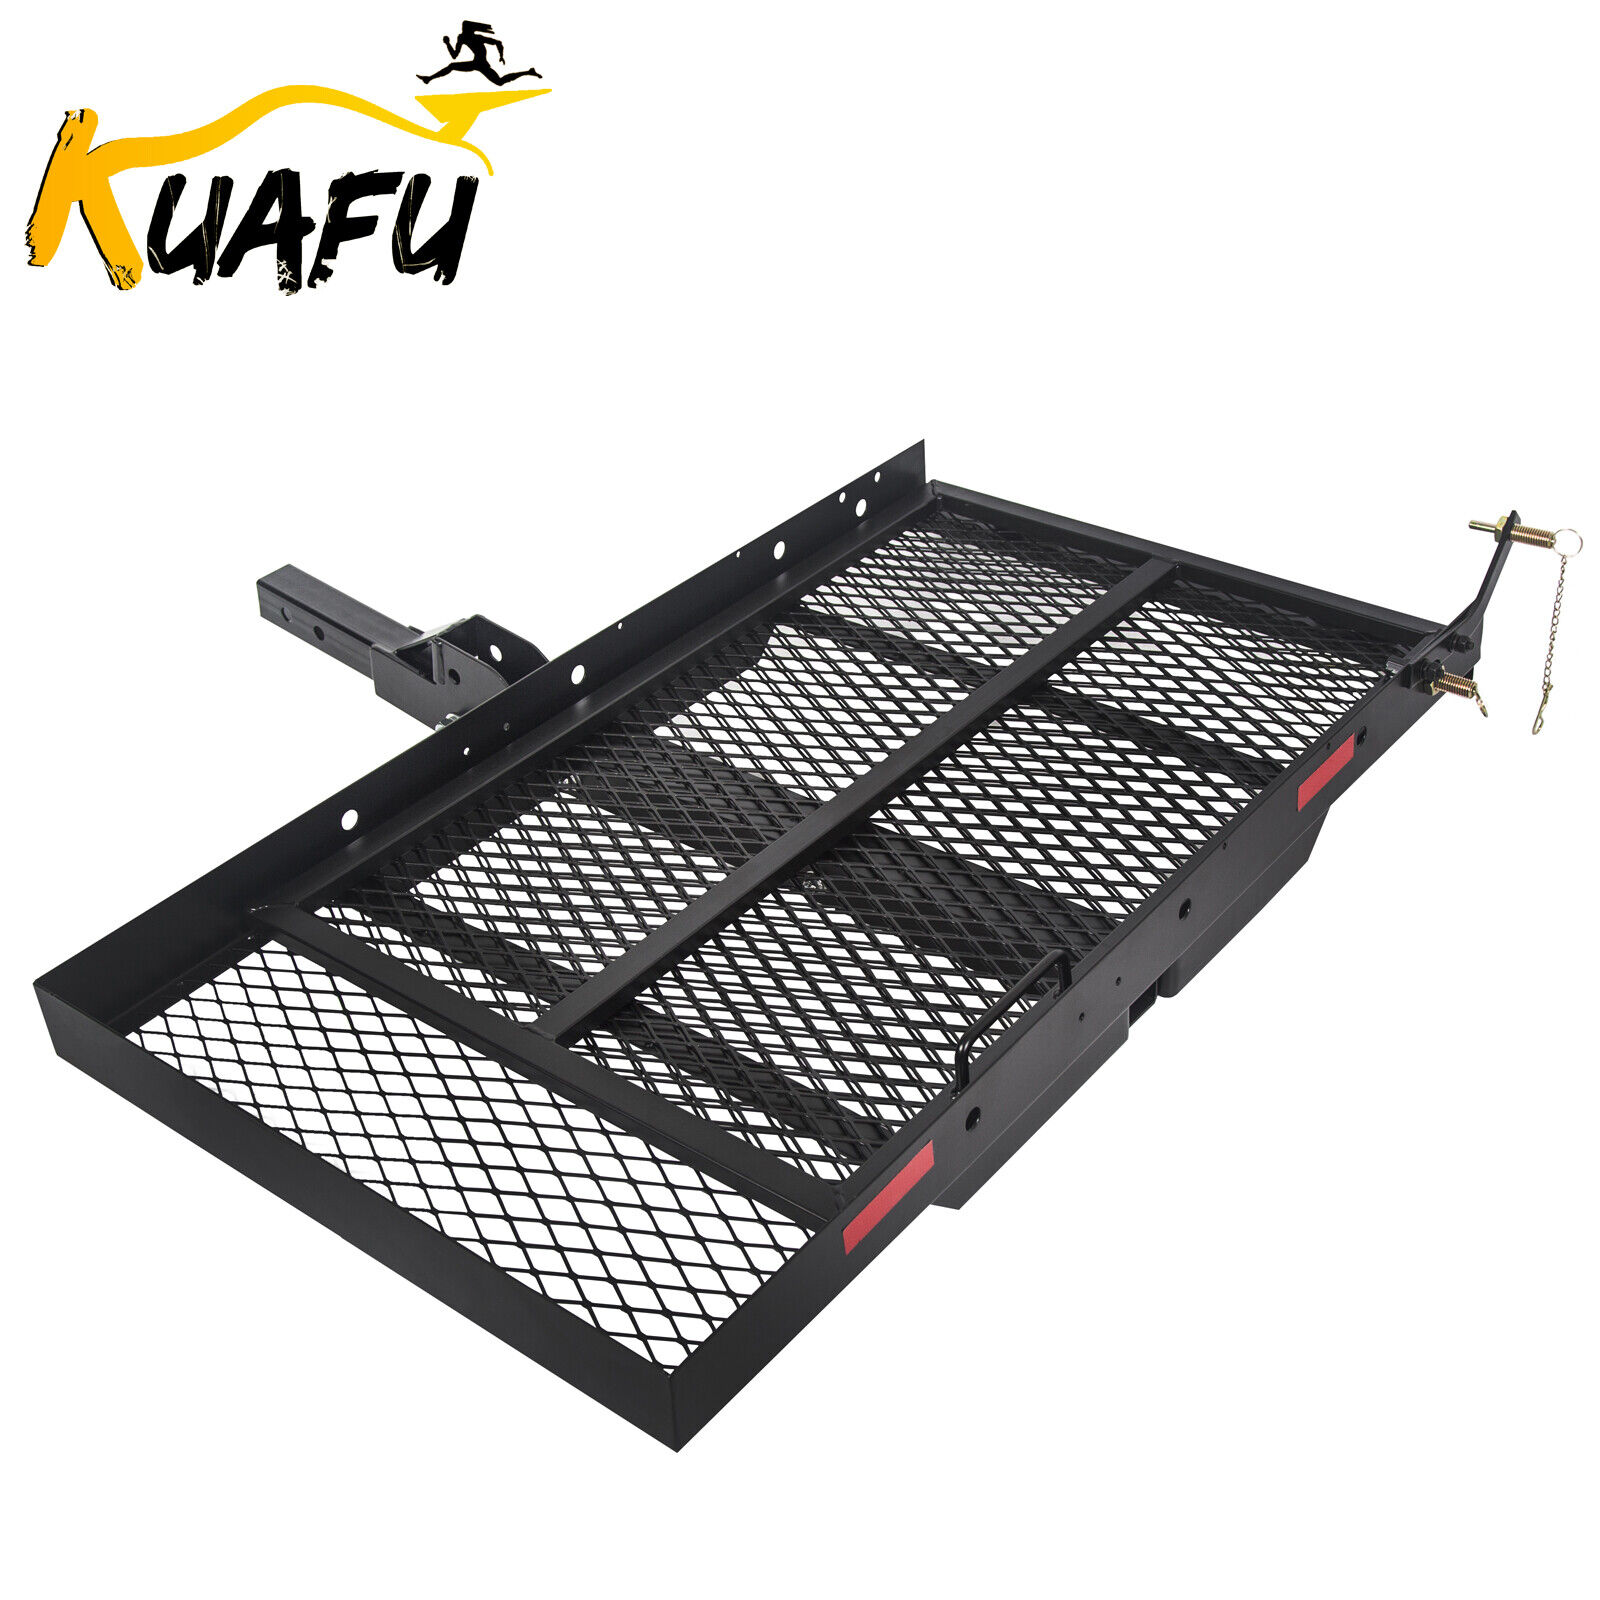 KUAFU Mobility Carrier Wheelchair Scooter Rack Disability Medical Ramp Hitch